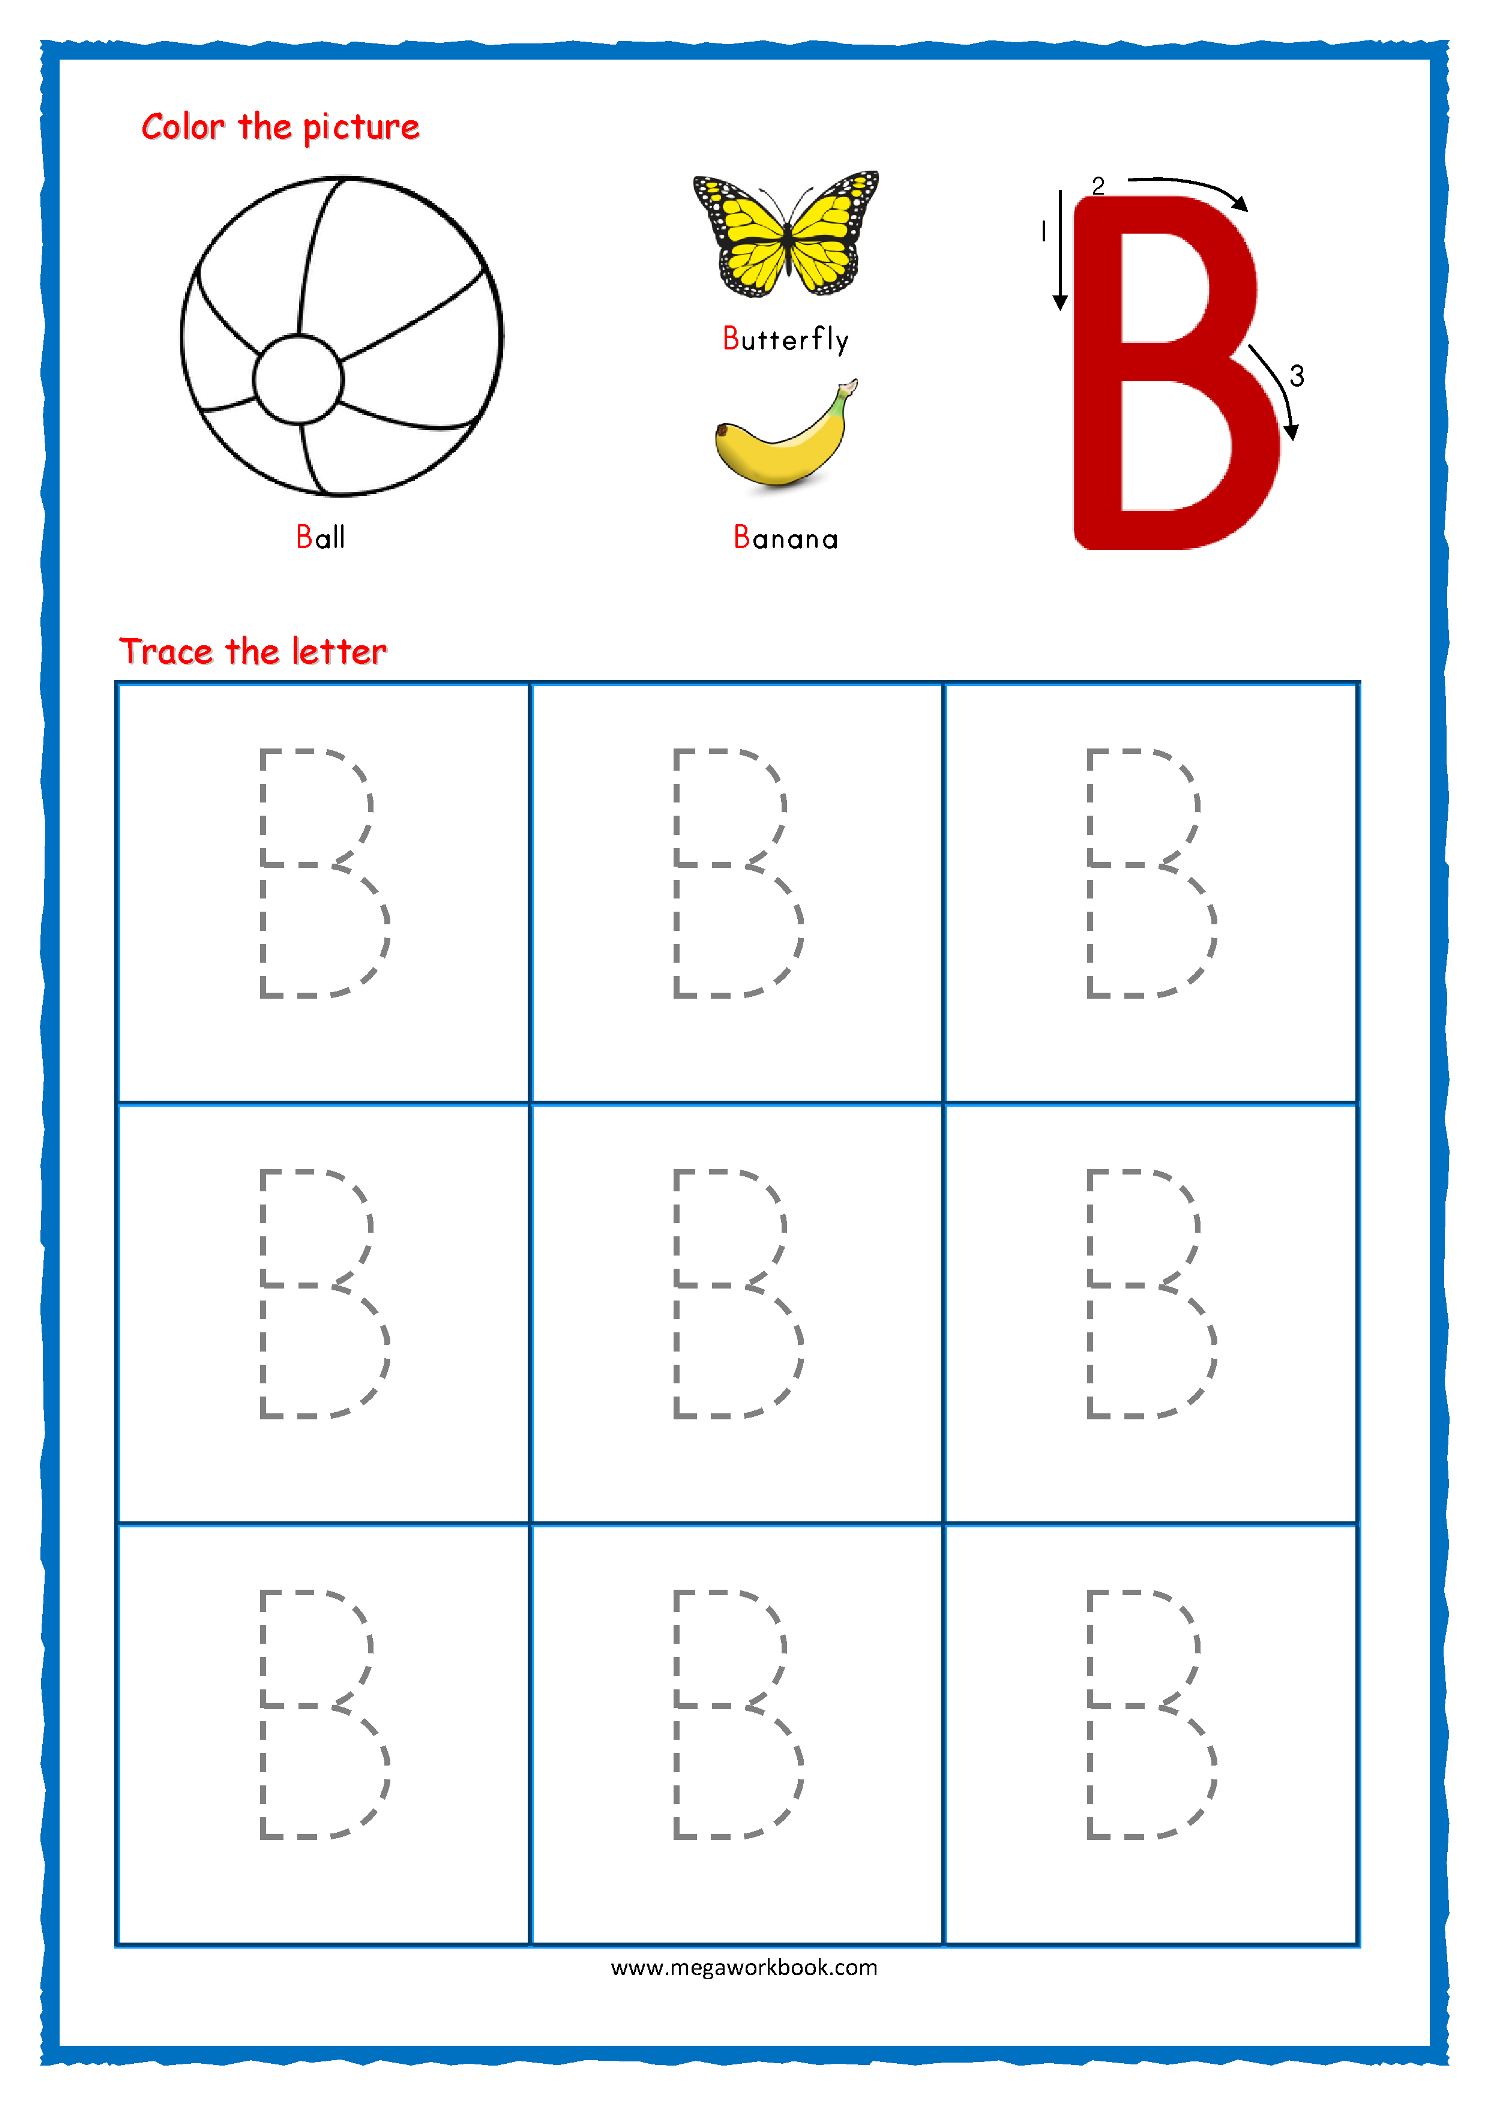 Coloring Book : Letter Tracingts Free Printable Coloring in Tracing Letter I Worksheets